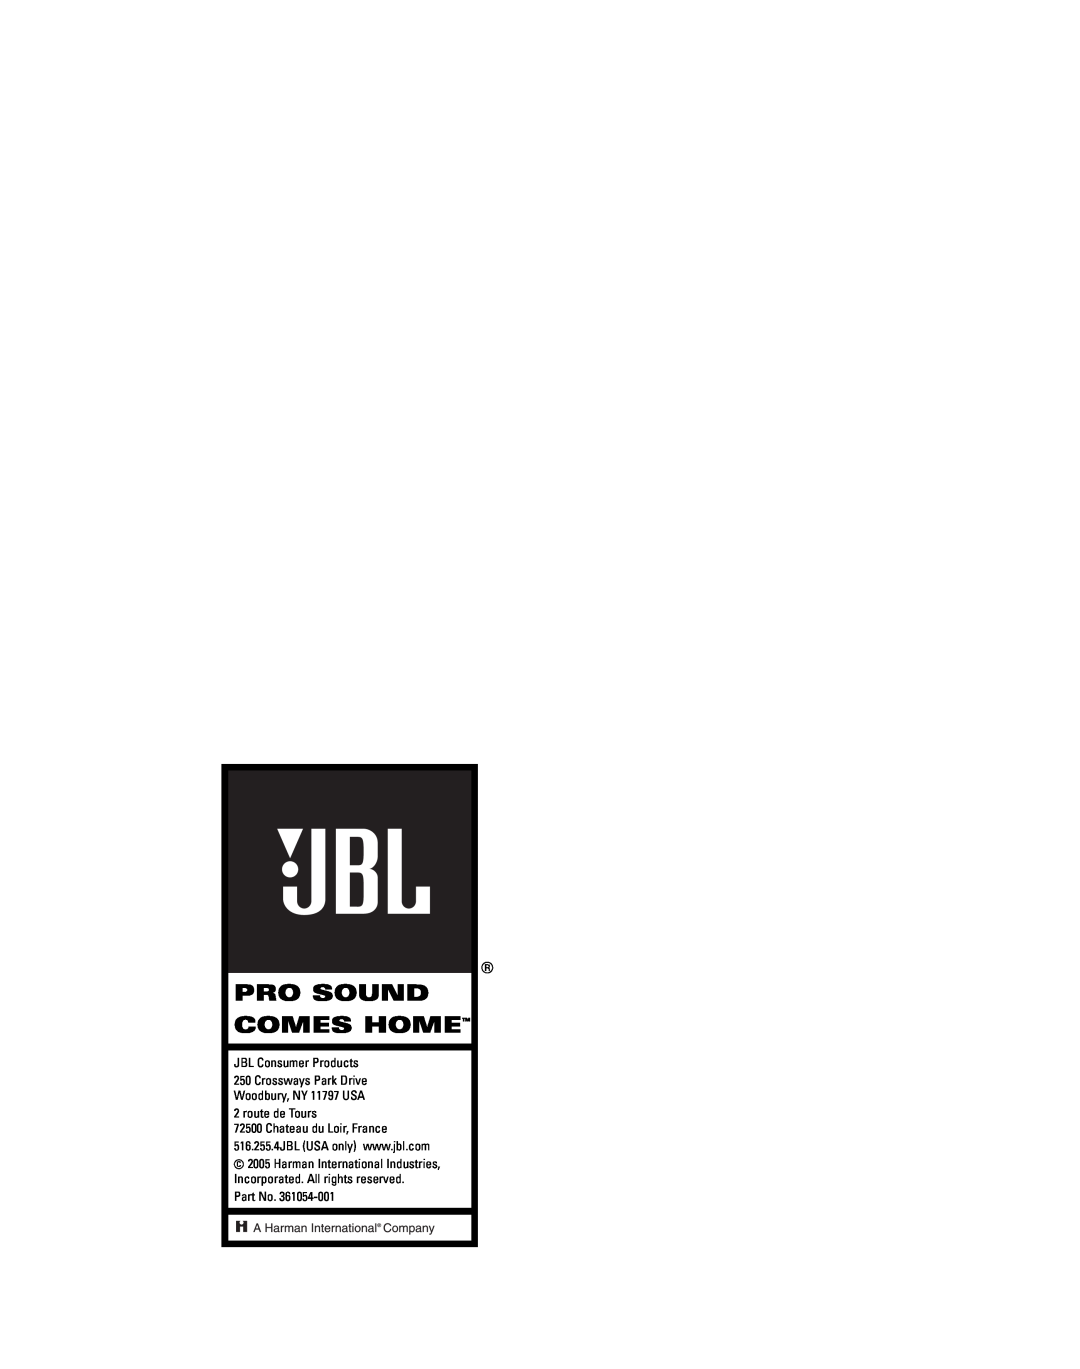 JBL S4800 Pro Sound Comes Home, JBL Consumer Products 250 Crossways Park Drive, Woodbury, NY 11797 USA 2 route de Tours 